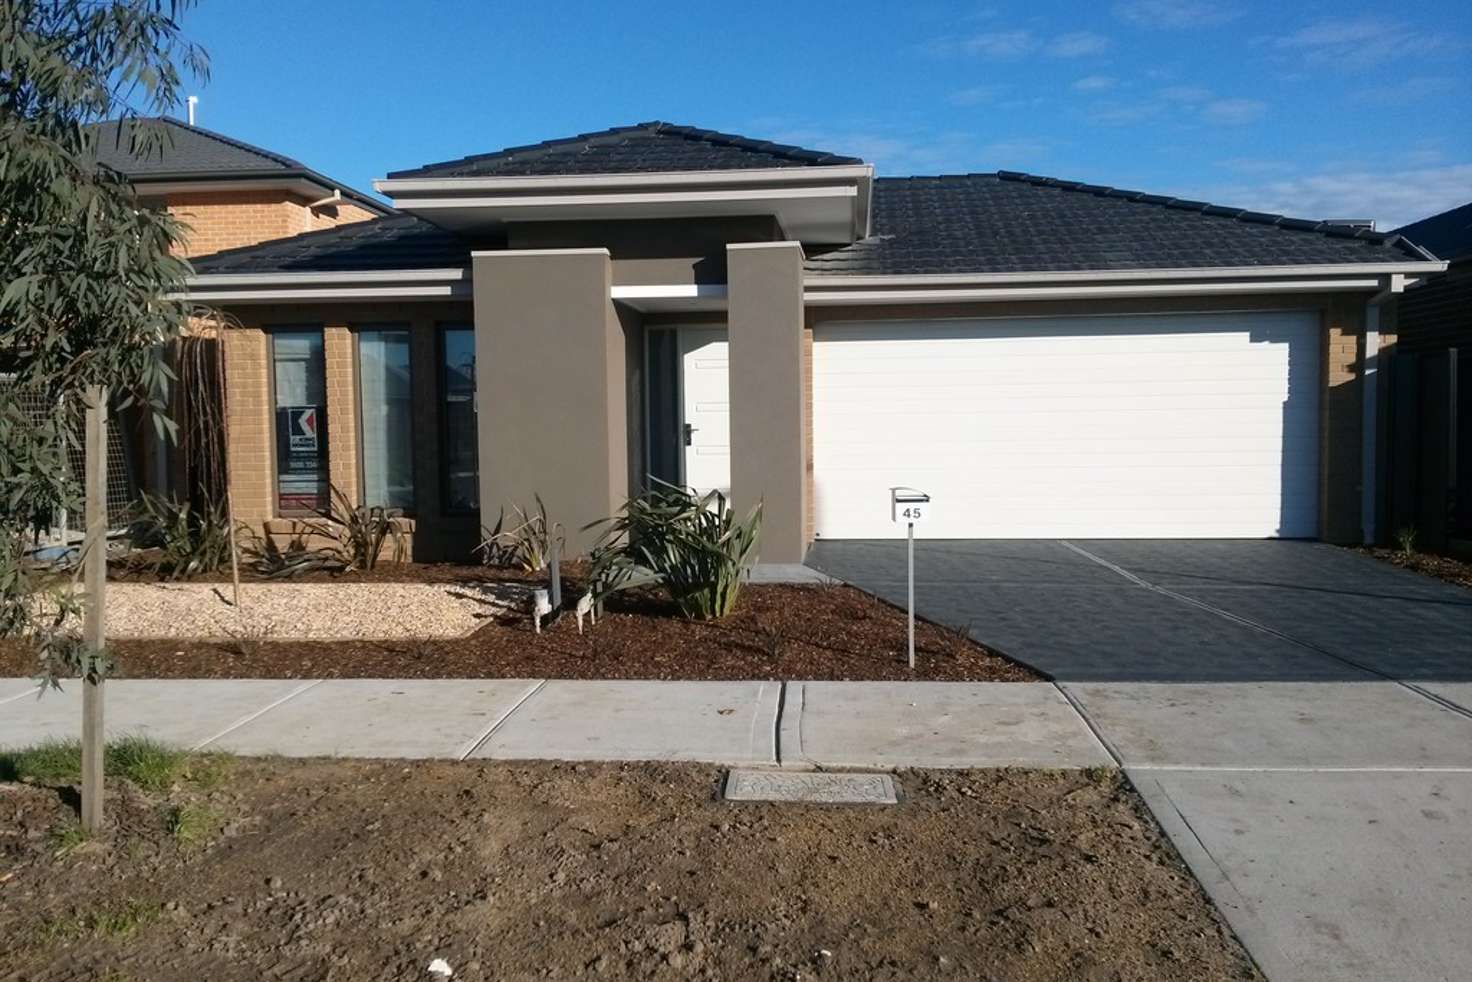 Main view of Homely house listing, 45 Chagall Parade, Clyde North VIC 3978